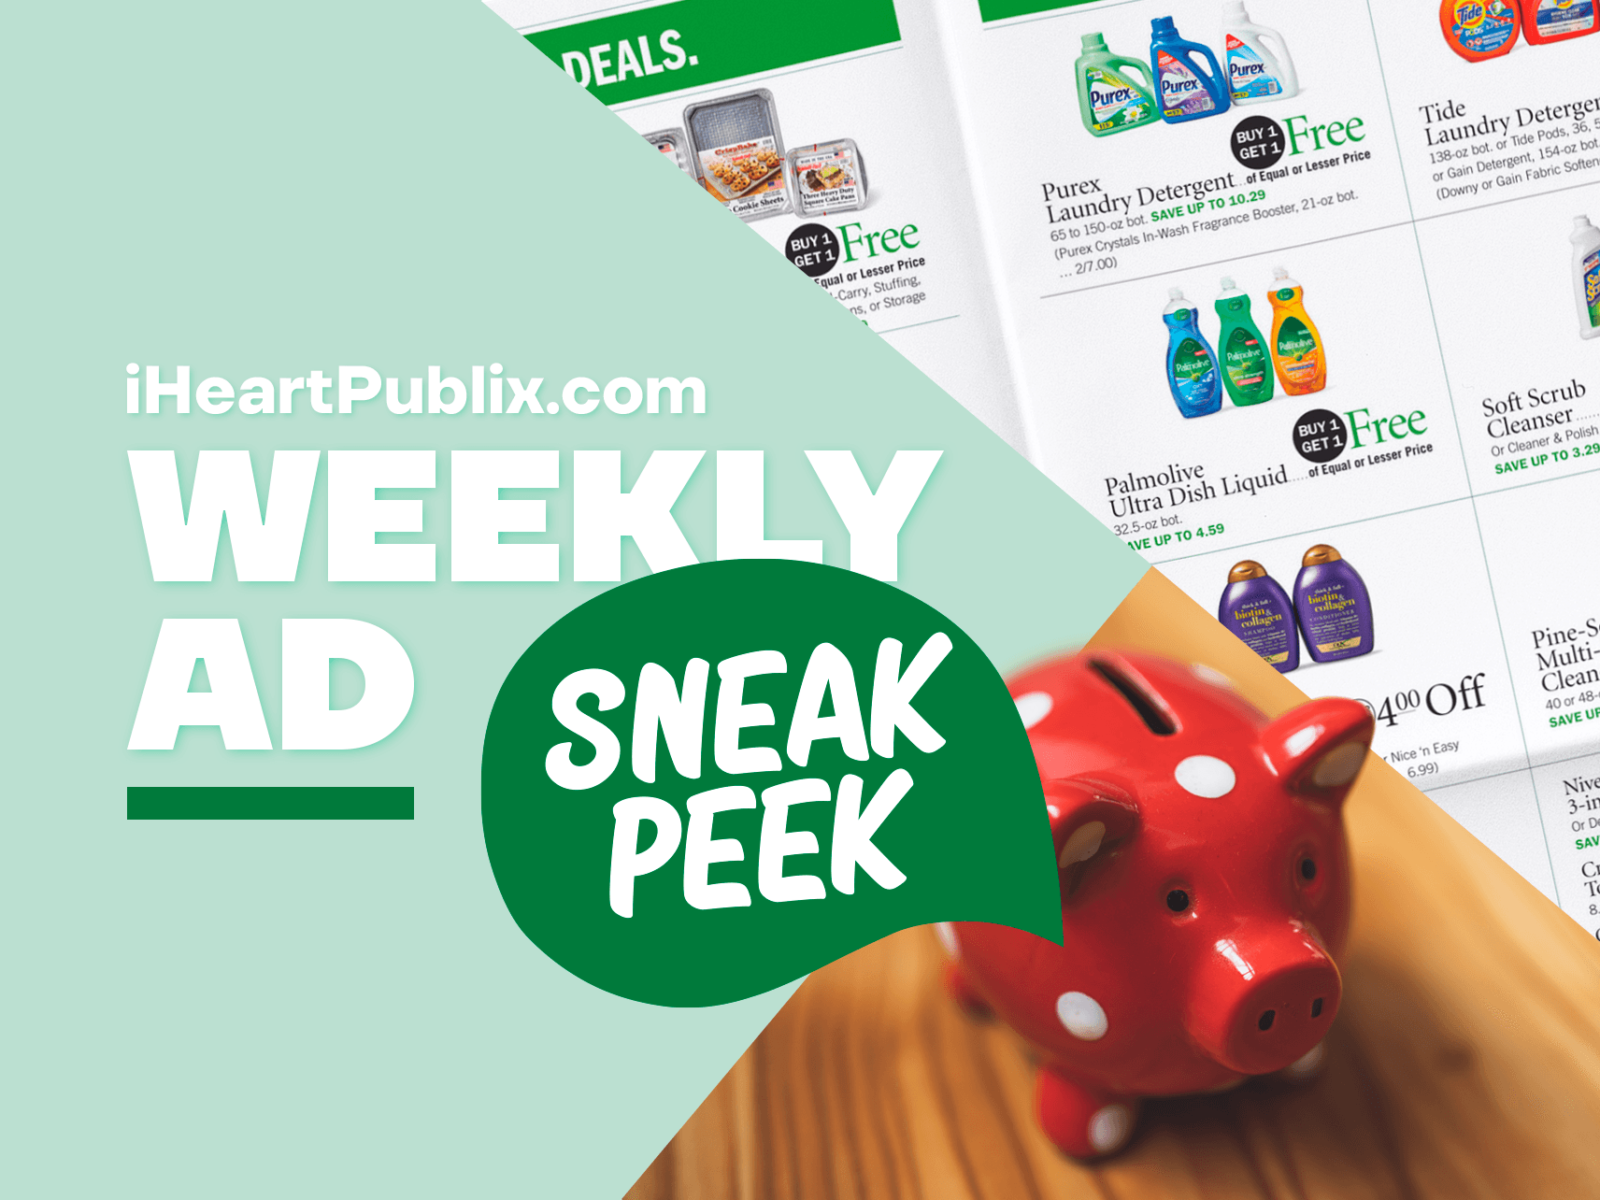 Publix Ad & Coupons Week Of 2/29 to 3/7 (2/28 to 3/6 For Some)